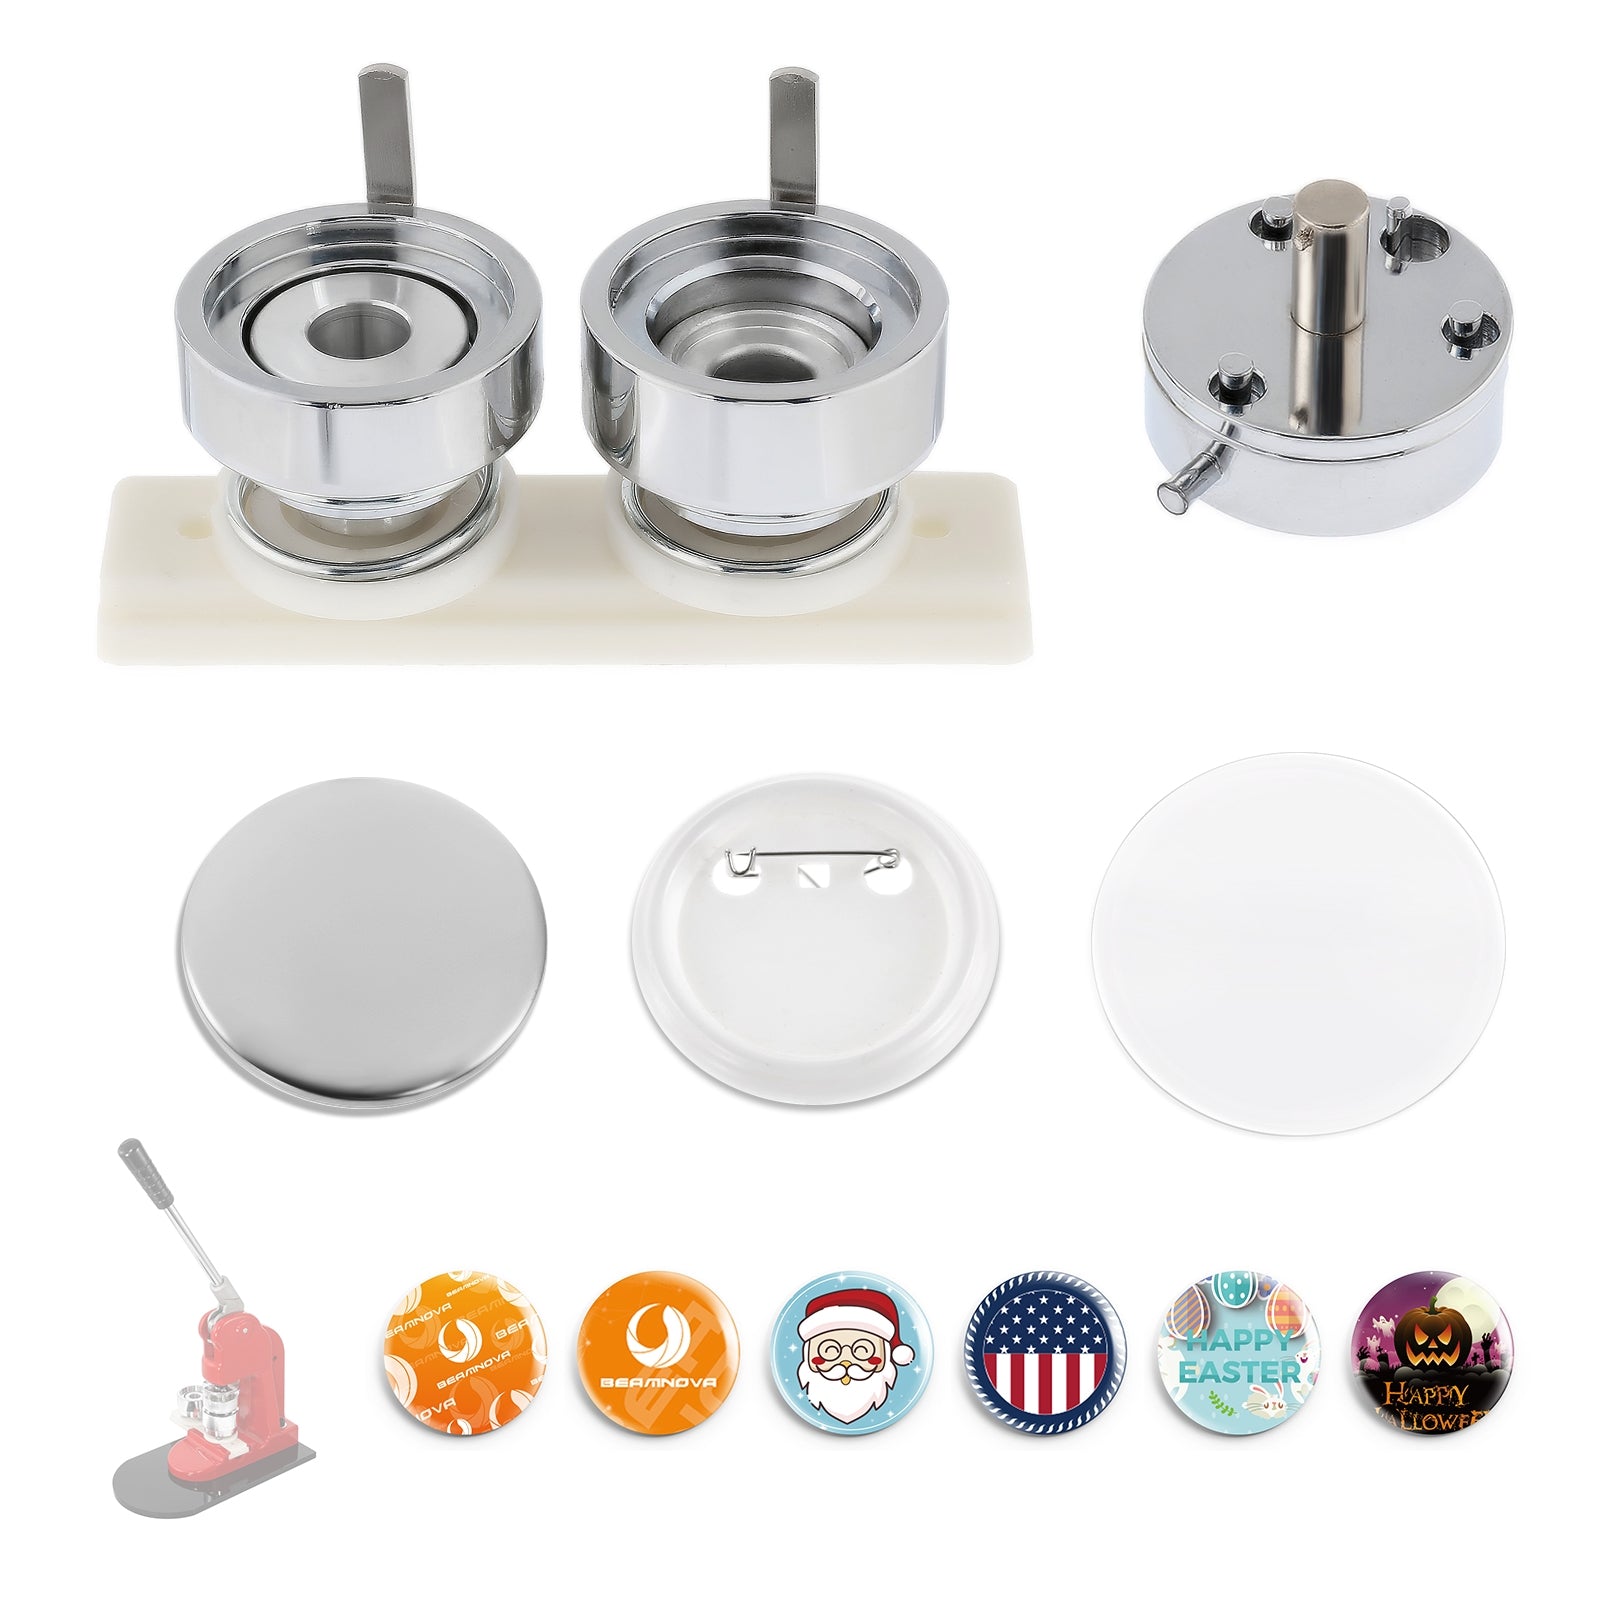 44MM 1-3/4 Inch round interchangeable moulds manual button machine kit